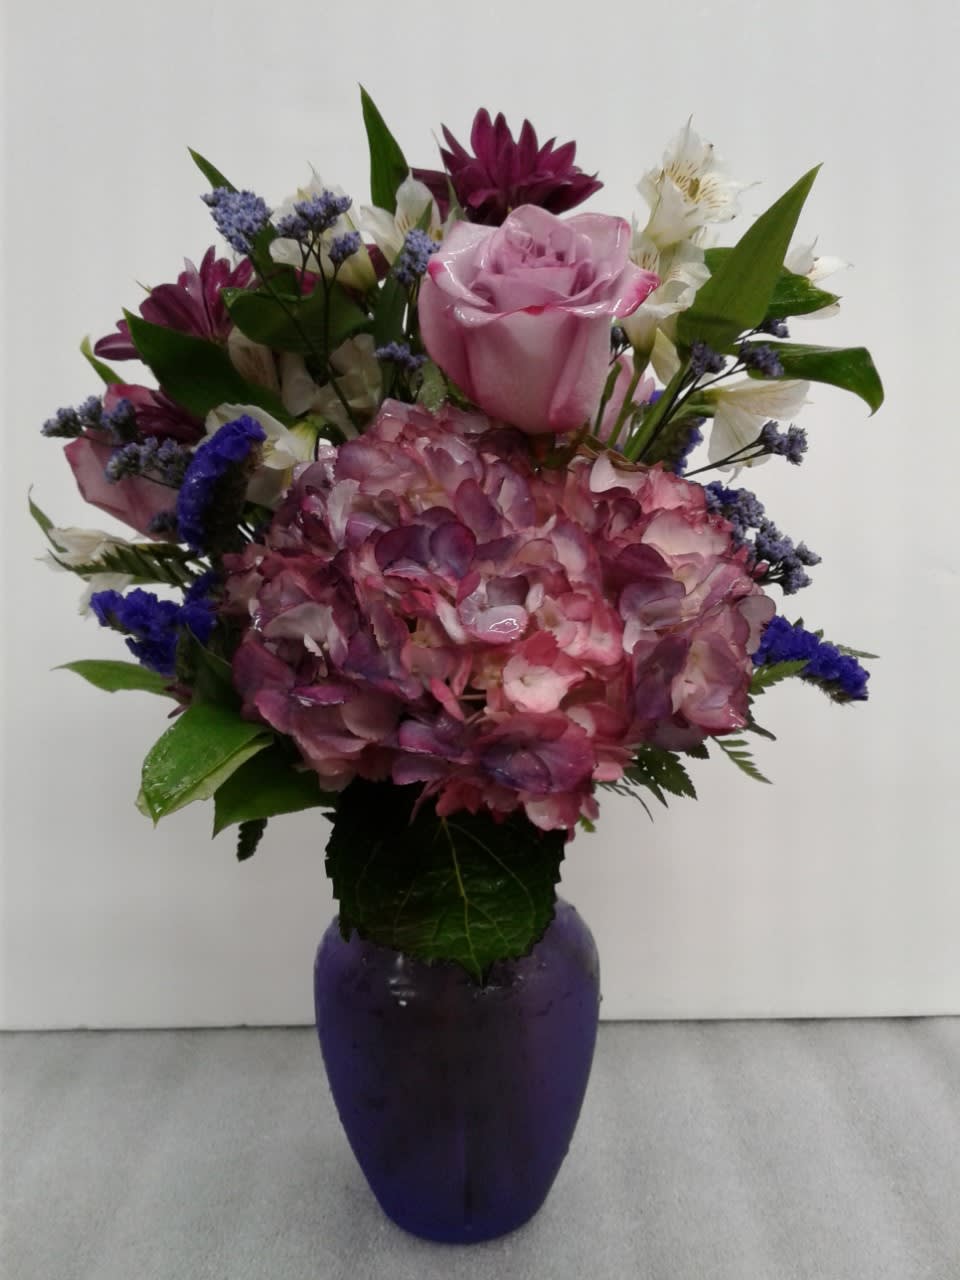 An arrangement of purple and white flowers mixed together in a beautiful